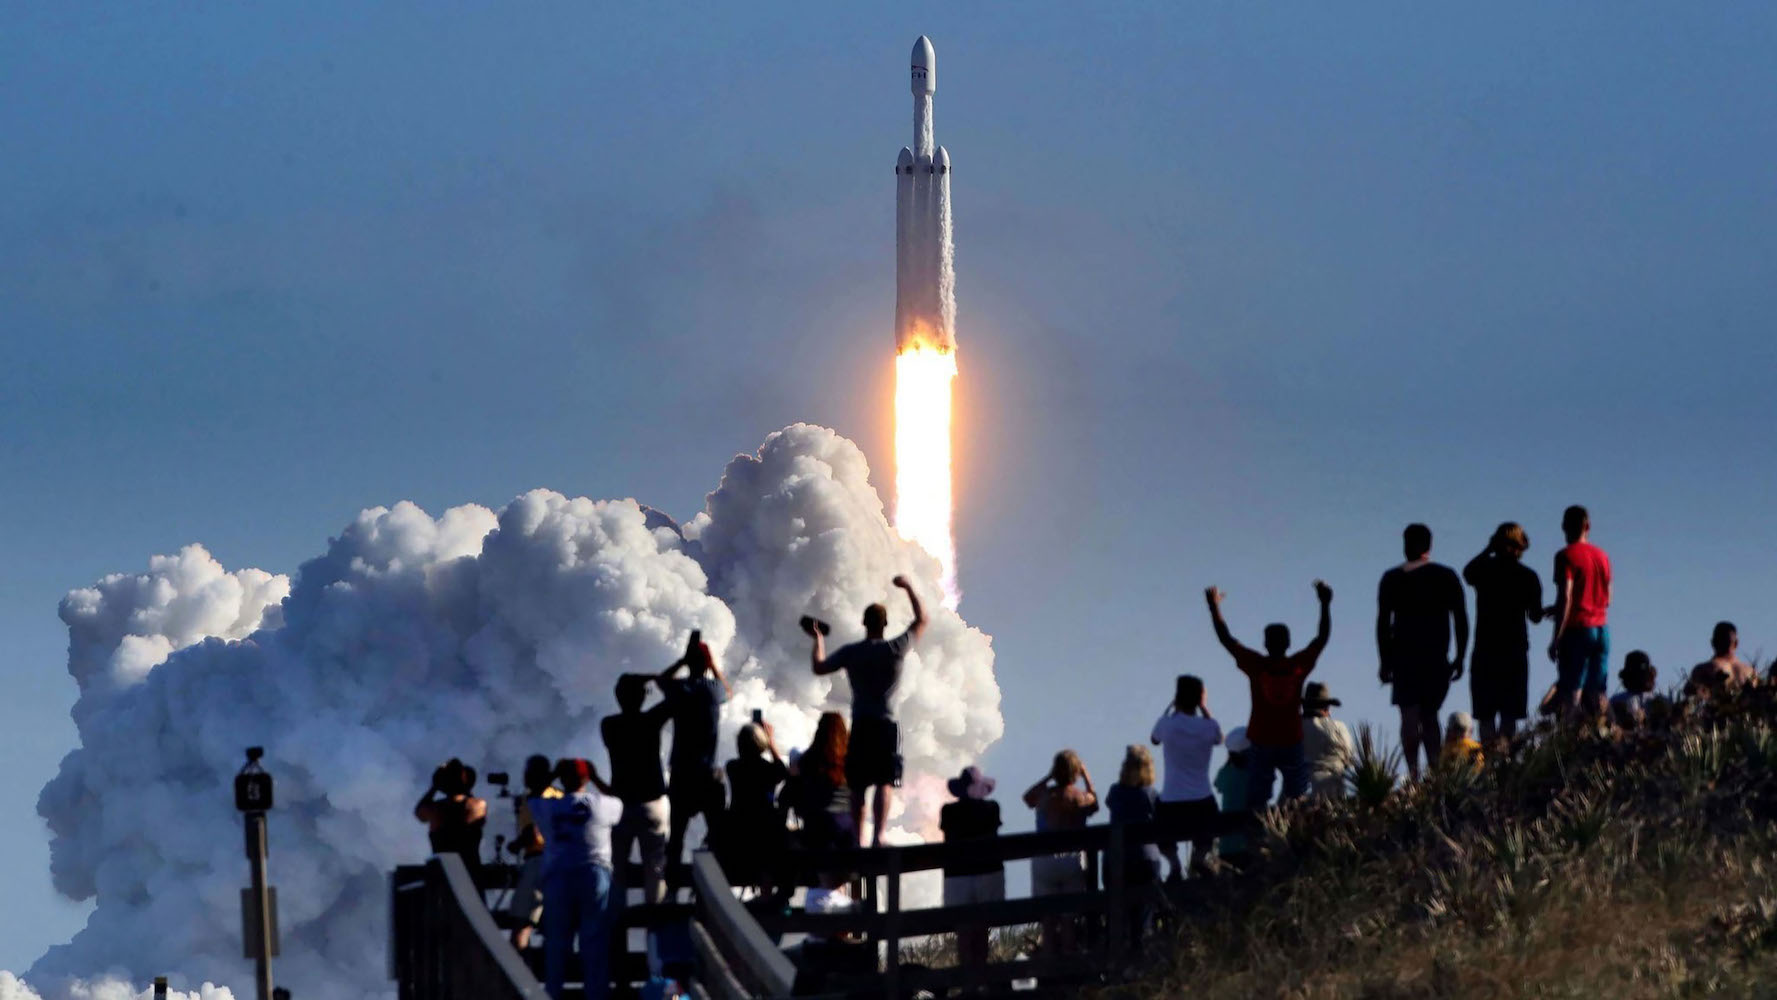 The crowd cheers on Playalinda Beach in the Canaveral National Seashore, just north of the Kennedy Space Center, during the launch of the SpaceX Falcon Heavy rocket on Feb. 6, 2018. Playalinda is one of the closest public viewing spots to see the launch, about 3 miles from the SpaceX launch pad 39-A.  (Joe Burbank/Orlando Sentinel/Tribune News Service via Getty Images)